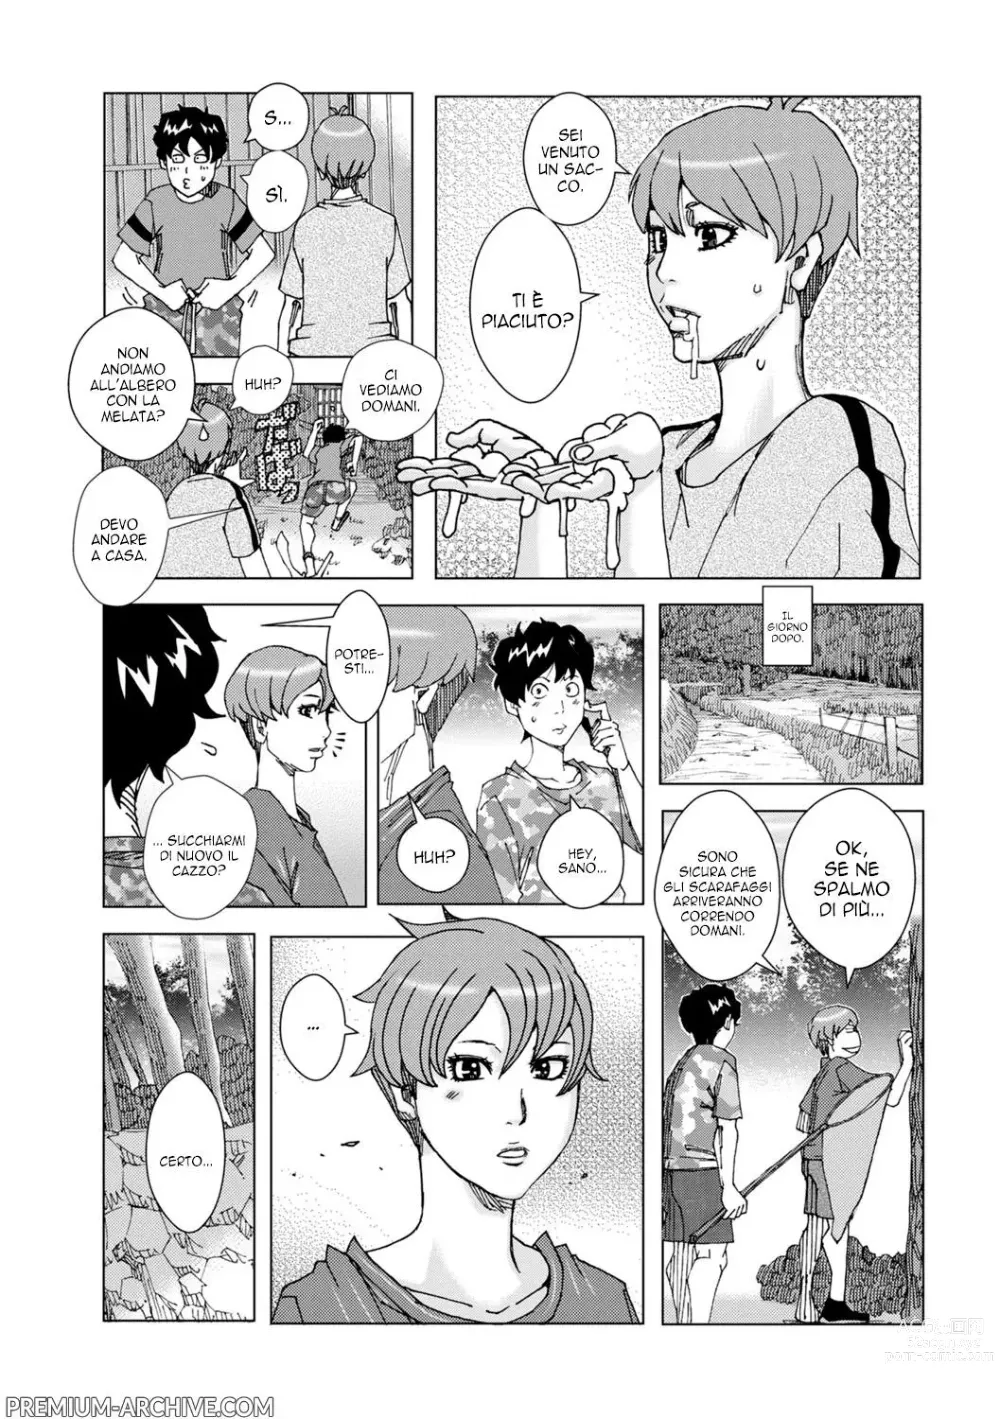 Page 7 of manga Memorie Sessuali Private